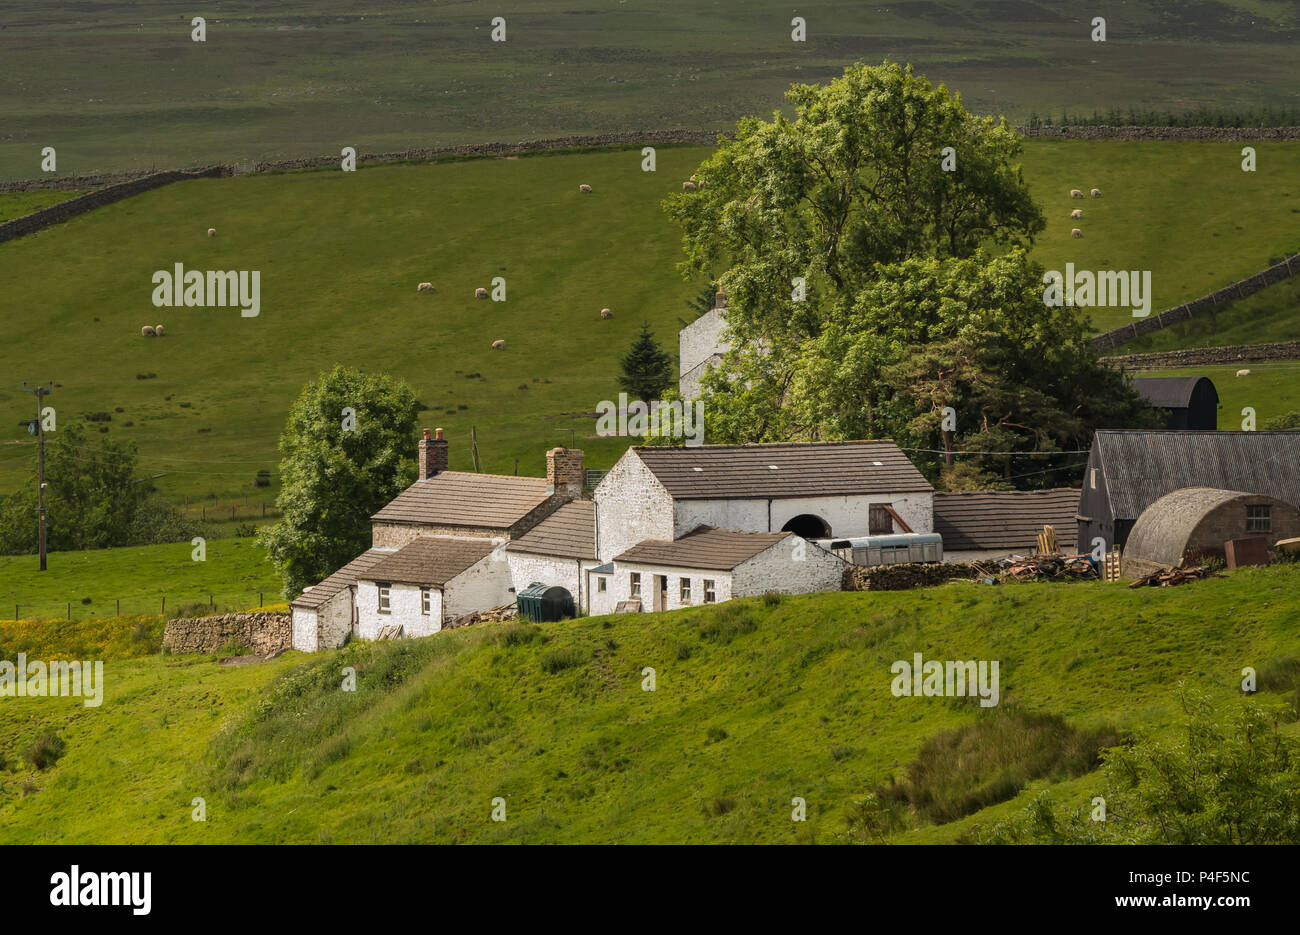 A typical Upper Teesdale whitewashed hill farm at Birch Bush, Ettersgill, North Pennines AONB, UK Stock Photo